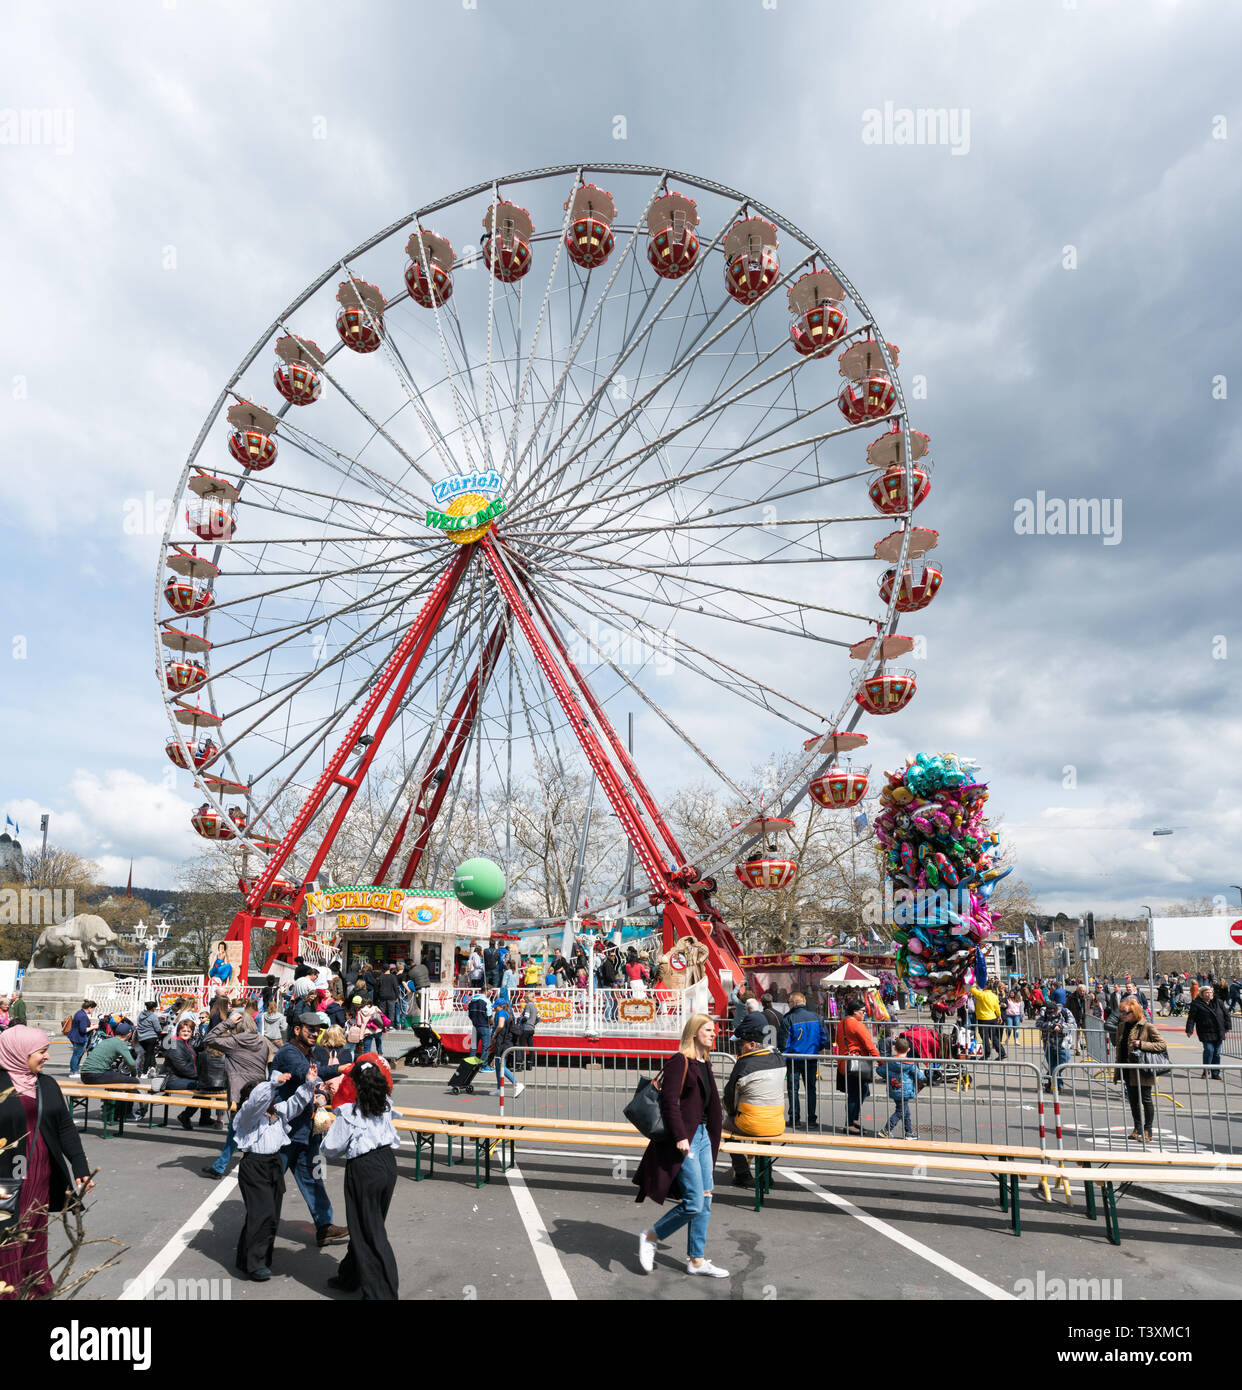 Zurich, ZH / Switzerland - April 8, 2019: people gathering at the Sechselauten spring festival in Zurich and enjoying the amusement park rides and att Stock Photo